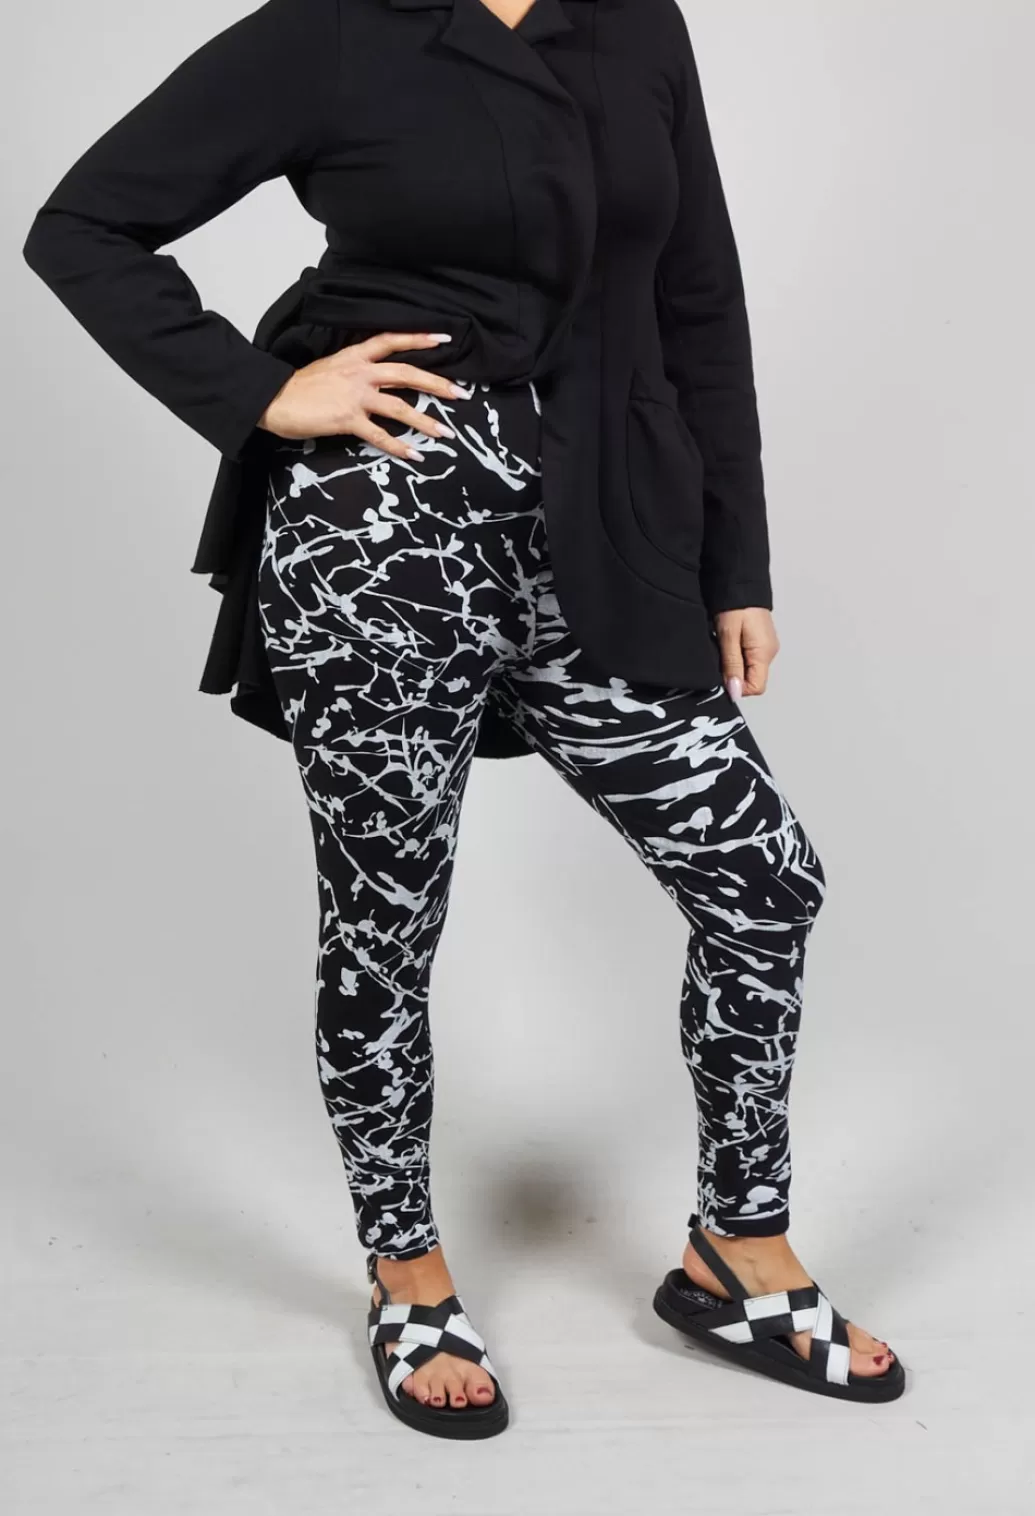 Leggings^Bread and Butter Ankle Cropped Leggings In Black With White Print